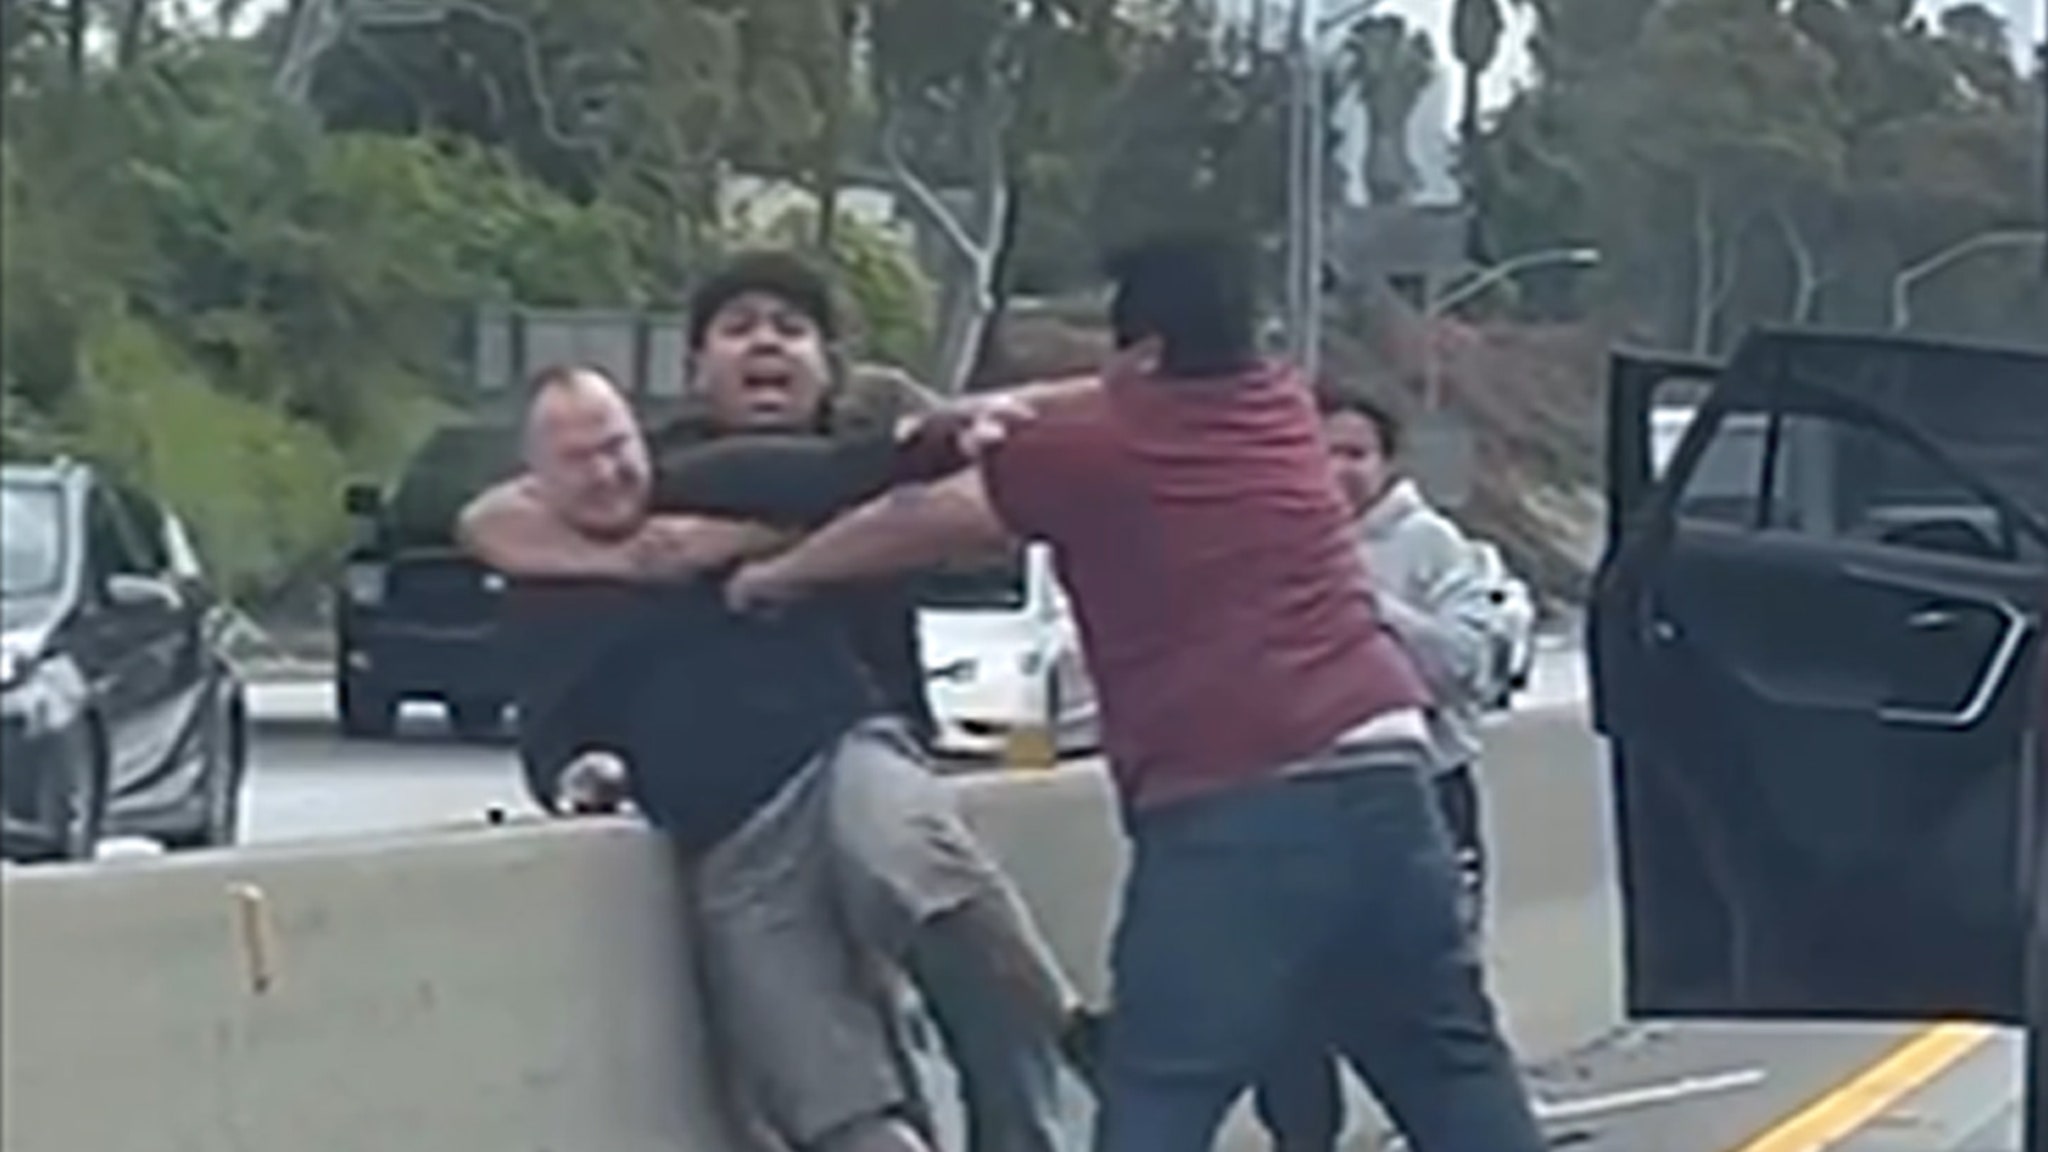 Road Rage Fight Breaks Out on L.A. Freeway After Minor Fender Bender